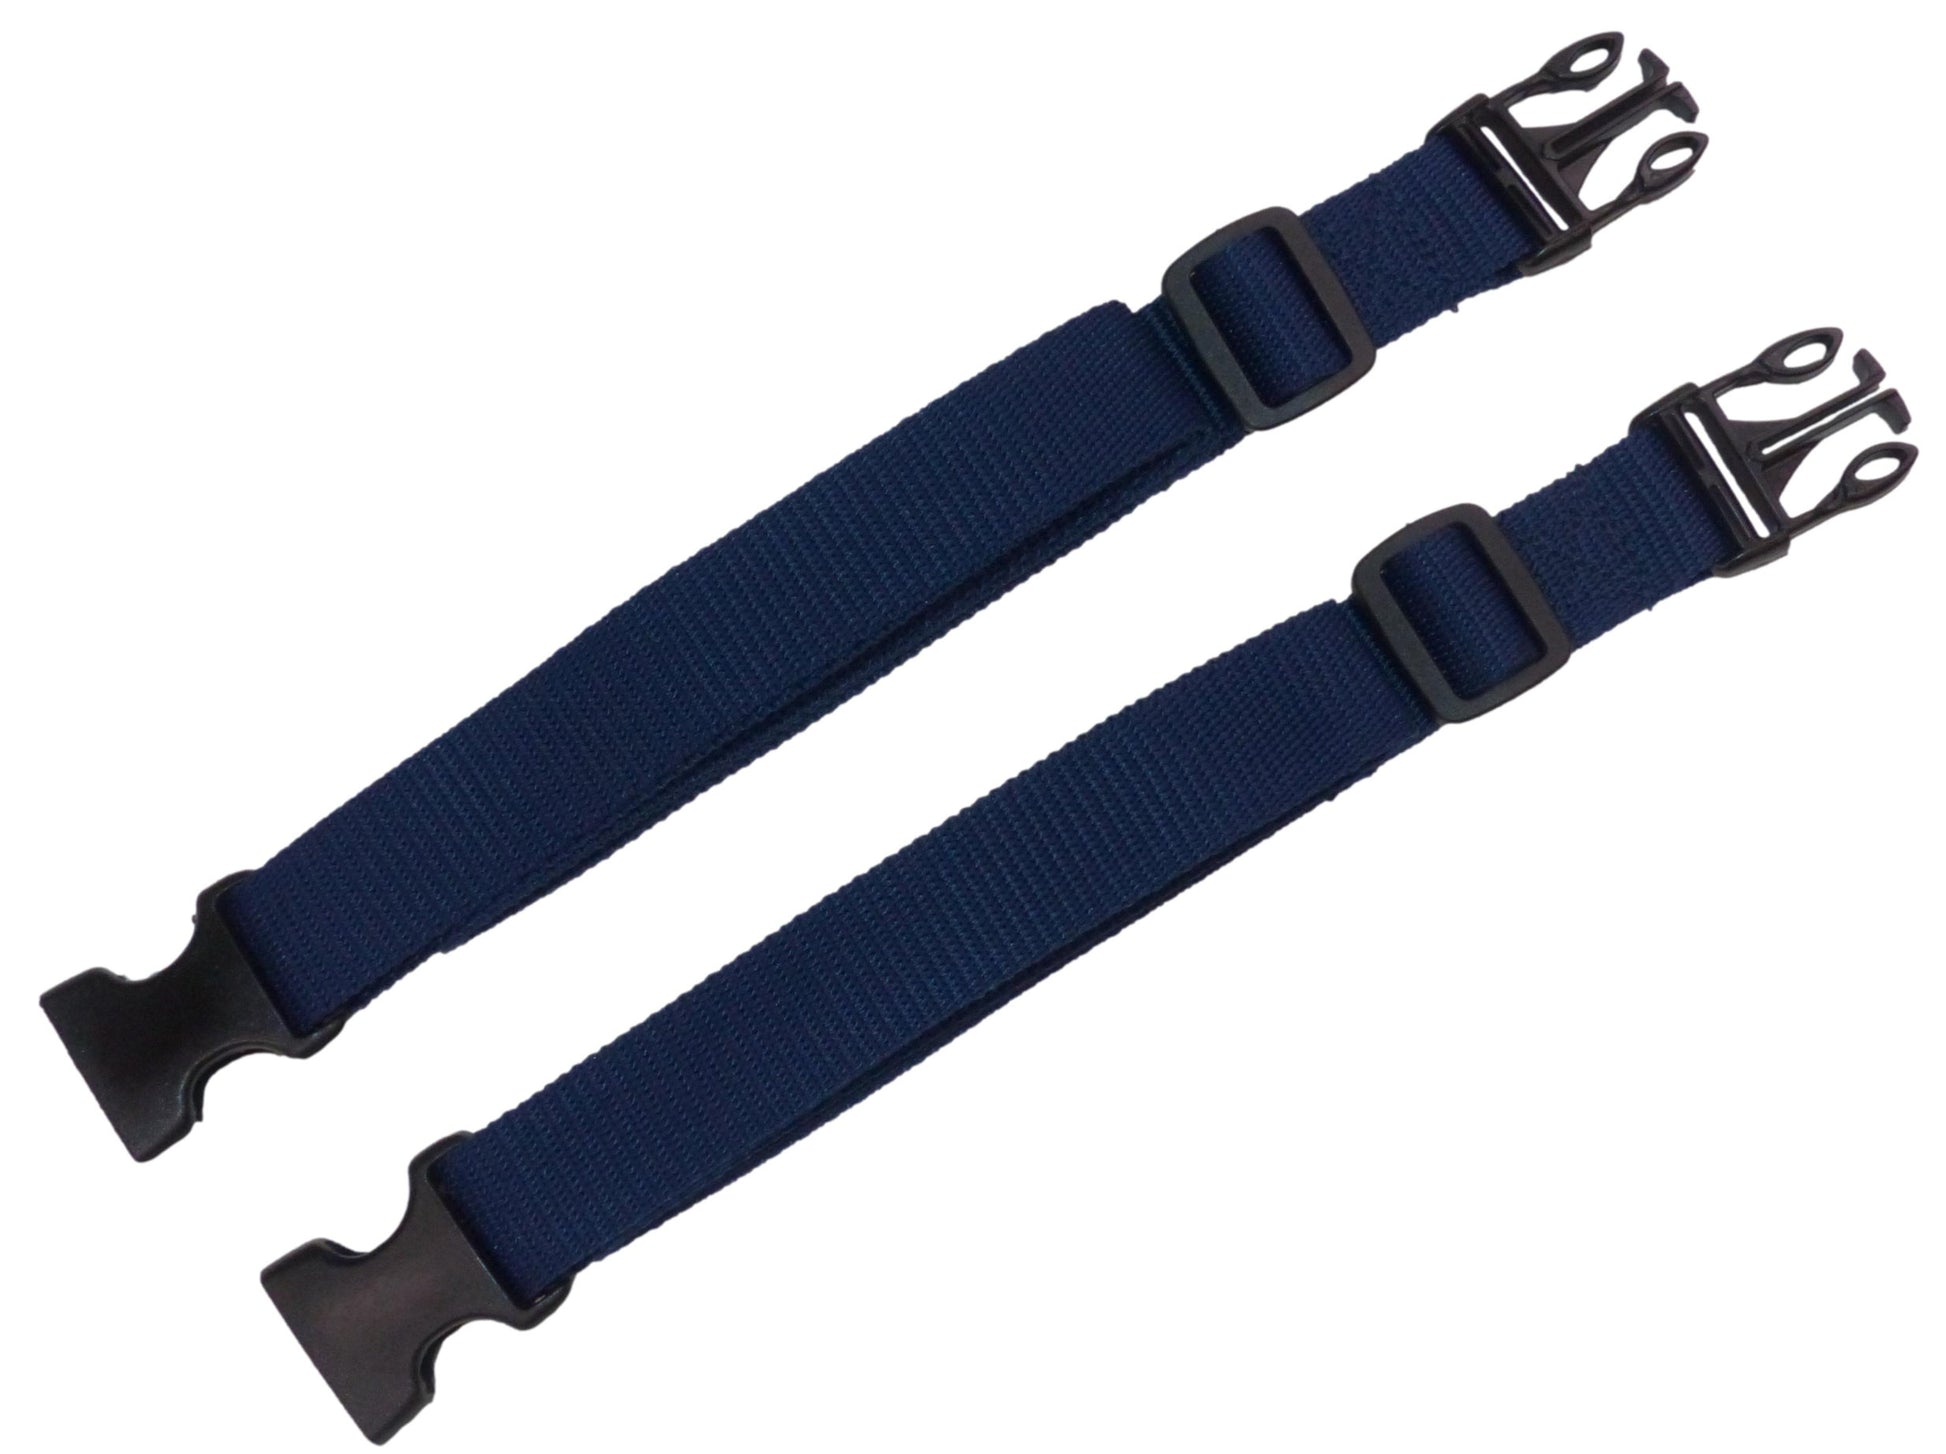 25mm Webbing Strap with Quick Release & Length-Adjusting Buckles (Pair) in navy blue